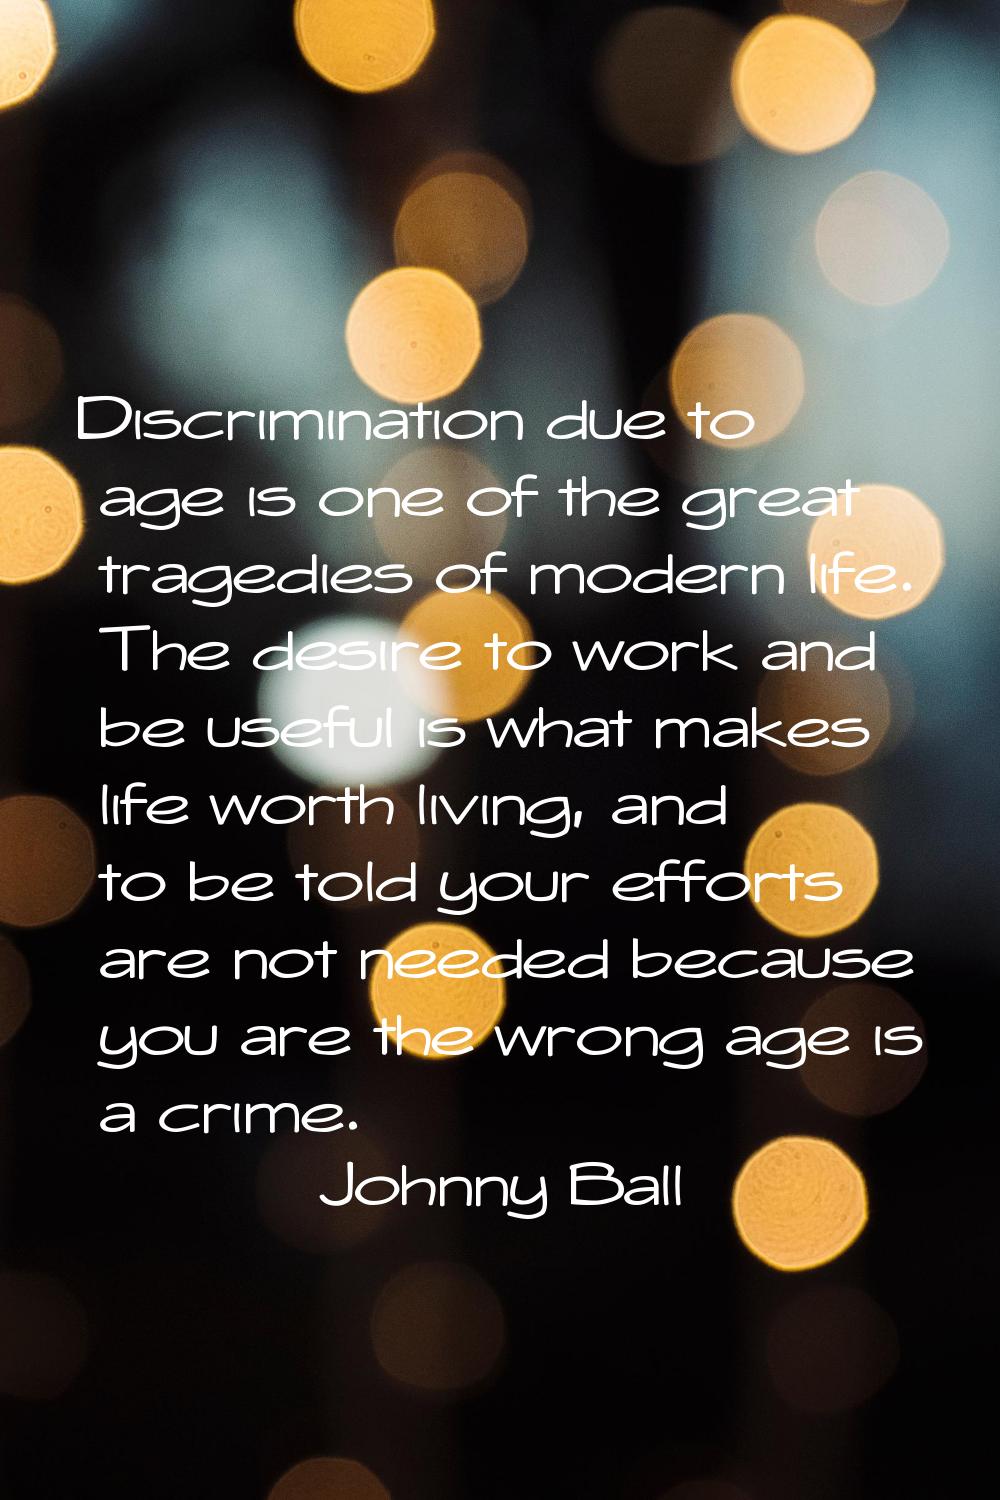 Discrimination due to age is one of the great tragedies of modern life. The desire to work and be u